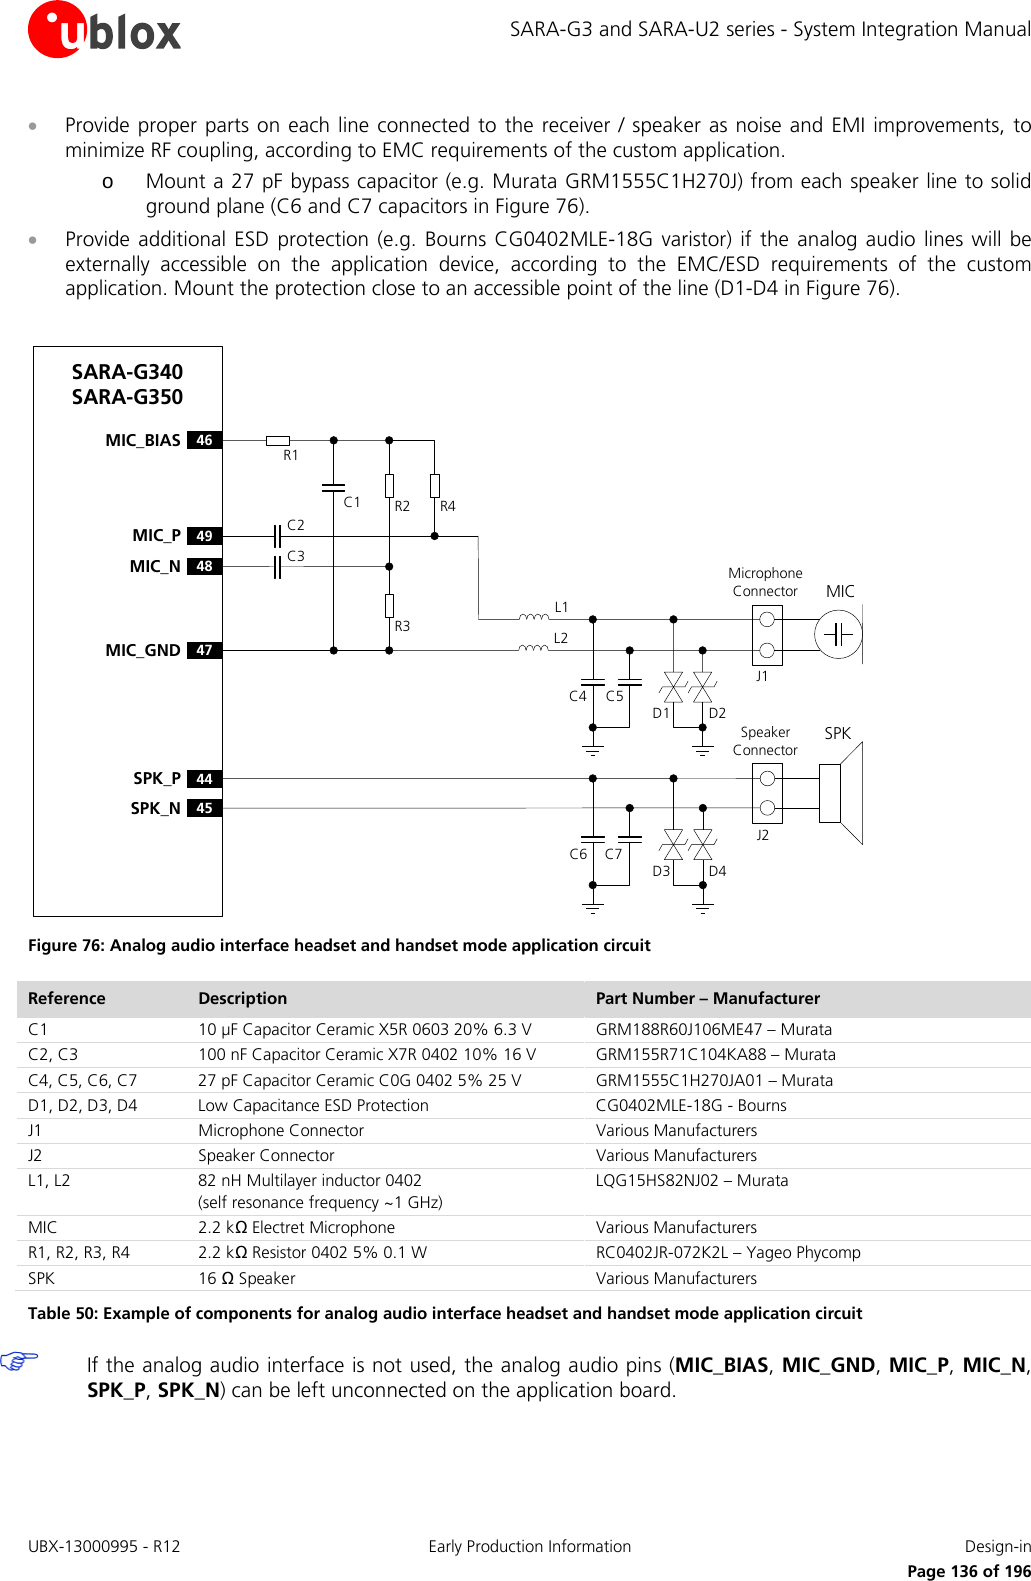 SARA-G3 and SARA-U2 series - System Integration Manual • Provide proper parts on each line connected to the receiver / speaker as noise and EMI improvements, to minimize RF coupling, according to EMC requirements of the custom application. o Mount a 27 pF bypass capacitor (e.g. Murata GRM1555C1H270J) from each speaker line to solid ground plane (C6 and C7 capacitors in Figure 76). • Provide additional ESD protection (e.g. Bourns CG0402MLE-18G varistor) if the analog audio lines will be externally accessible on the application device, according to the  EMC/ESD requirements of the custom application. Mount the protection close to an accessible point of the line (D1-D4 in Figure 76).  SARA-G340 SARA-G35049MIC_PR1R2 R444SPK_P48MIC_N45SPK_NR3C146MIC_BIAS47MIC_GNDC2C3D3D1C6 C7L2L1C5C4SPKSpeaker ConnectorJ2Microphone Connector MICJ1D4D2 Figure 76: Analog audio interface headset and handset mode application circuit Reference Description Part Number – Manufacturer C1 10 µF Capacitor Ceramic X5R 0603 20% 6.3 V GRM188R60J106ME47 – Murata C2, C3 100 nF Capacitor Ceramic X7R 0402 10% 16 V GRM155R71C104KA88 – Murata C4, C5, C6, C7 27 pF Capacitor Ceramic C0G 0402 5% 25 V  GRM1555C1H270JA01 – Murata D1, D2, D3, D4 Low Capacitance ESD Protection CG0402MLE-18G - Bourns J1 Microphone Connector Various Manufacturers  J2 Speaker Connector Various Manufacturers  L1, L2 82 nH Multilayer inductor 0402 (self resonance frequency ~1 GHz) LQG15HS82NJ02 – Murata MIC 2.2 kΩ Electret Microphone Various Manufacturers R1, R2, R3, R4 2.2 kΩ Resistor 0402 5% 0.1 W  RC0402JR-072K2L – Yageo Phycomp SPK 16 Ω Speaker  Various Manufacturers Table 50: Example of components for analog audio interface headset and handset mode application circuit  If the analog audio interface is not used, the analog audio pins (MIC_BIAS, MIC_GND, MIC_P, MIC_N, SPK_P, SPK_N) can be left unconnected on the application board.  UBX-13000995 - R12 Early Production Information Design-in     Page 136 of 196 